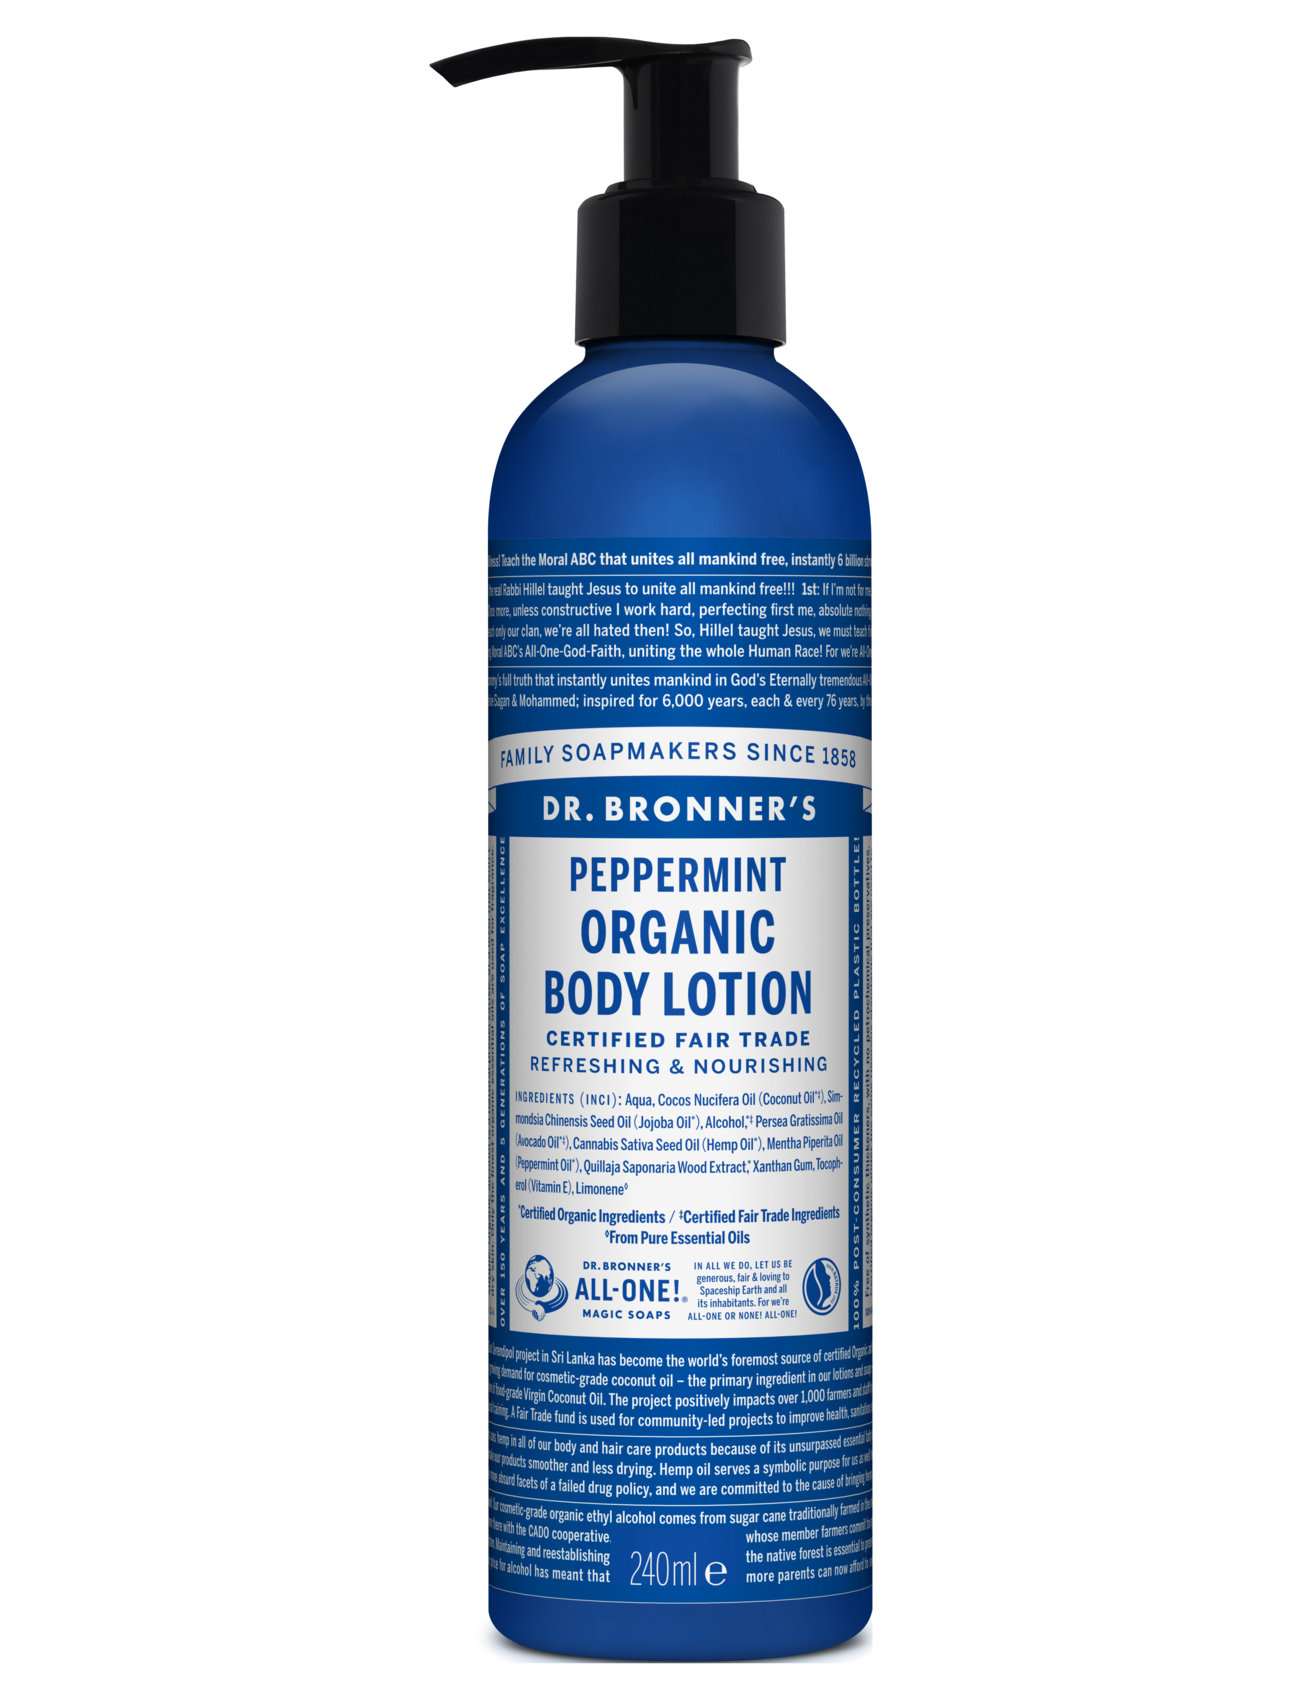 Body Lotion Peppermint Creme Lotion Bodybutter Nude Dr. Bronner’s